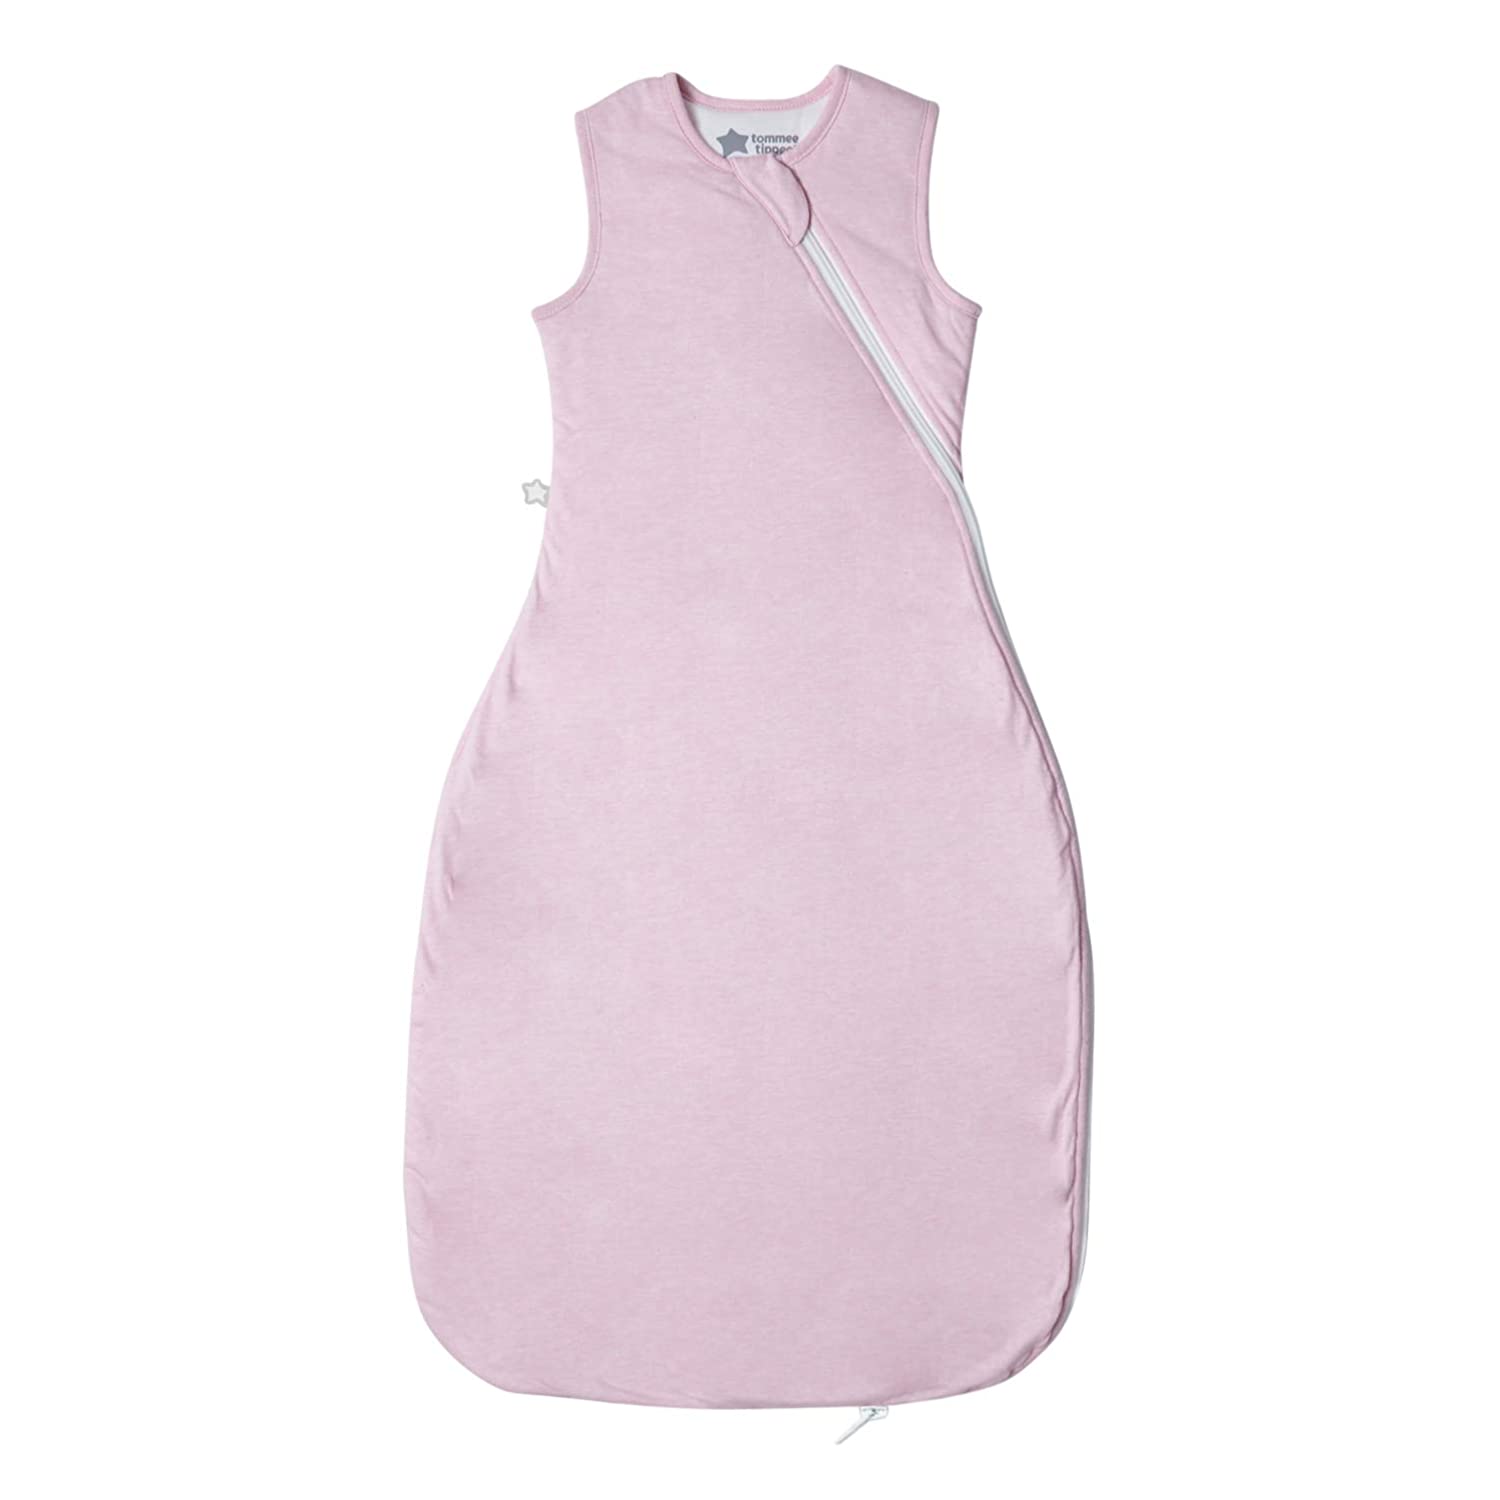 Tommee Tippee Grobag All Year Round Baby Sleeping Bag 6-18m 65-80cm 2.5 Tog Pink